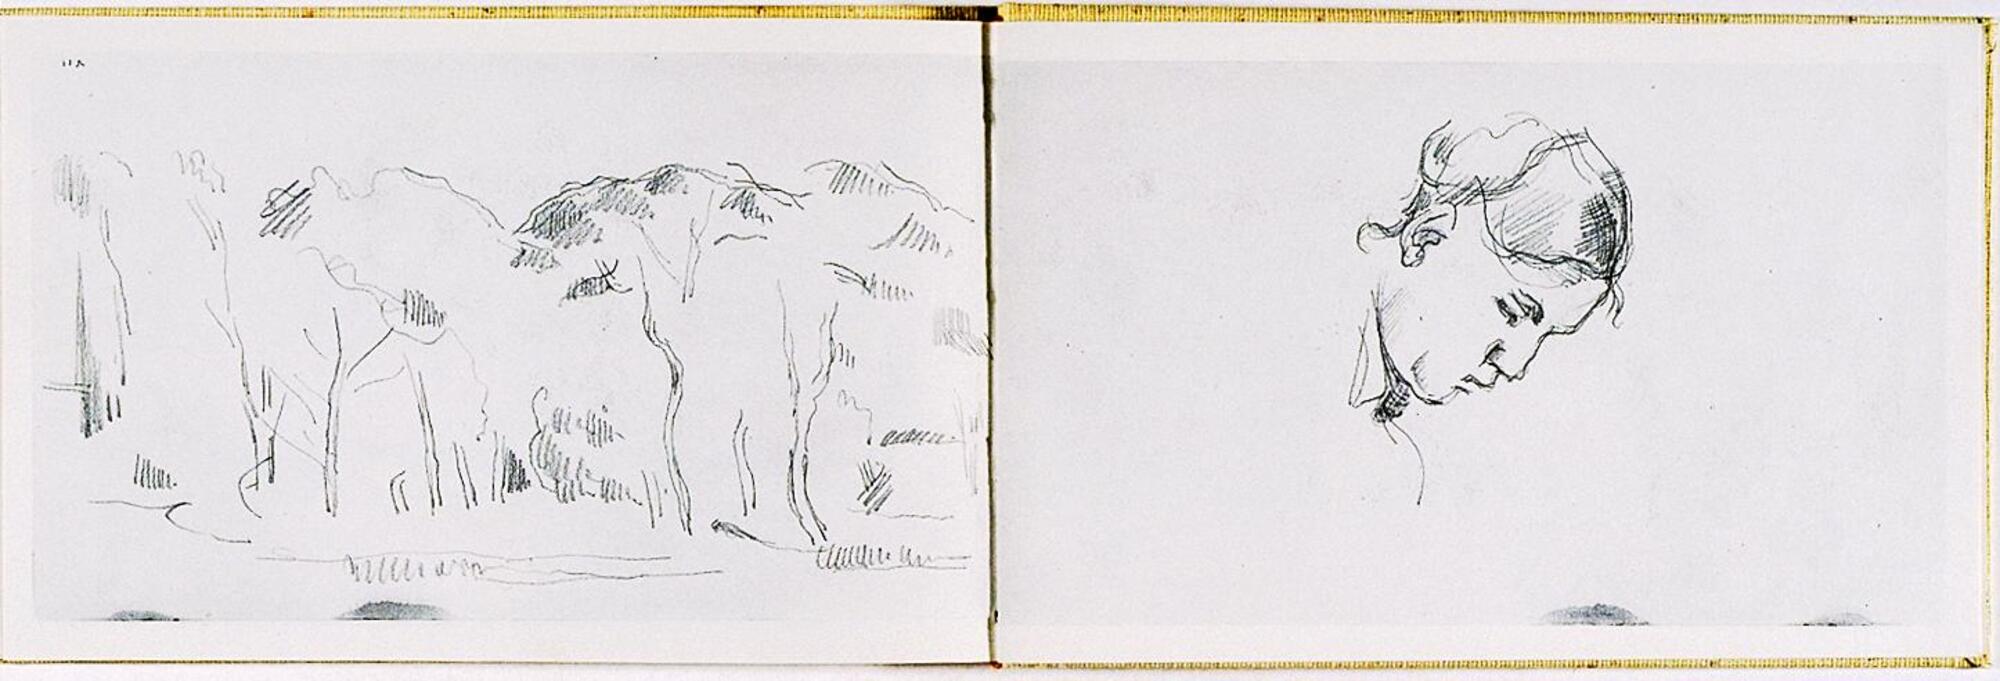 This object is a facsimile reproduction of a sketchbook of drawings by Paul Cezanne which was published by Curt Valentin. Sketches range in topics, from figures to landscapes, and various objects. There are also various notes scribbled throughout.